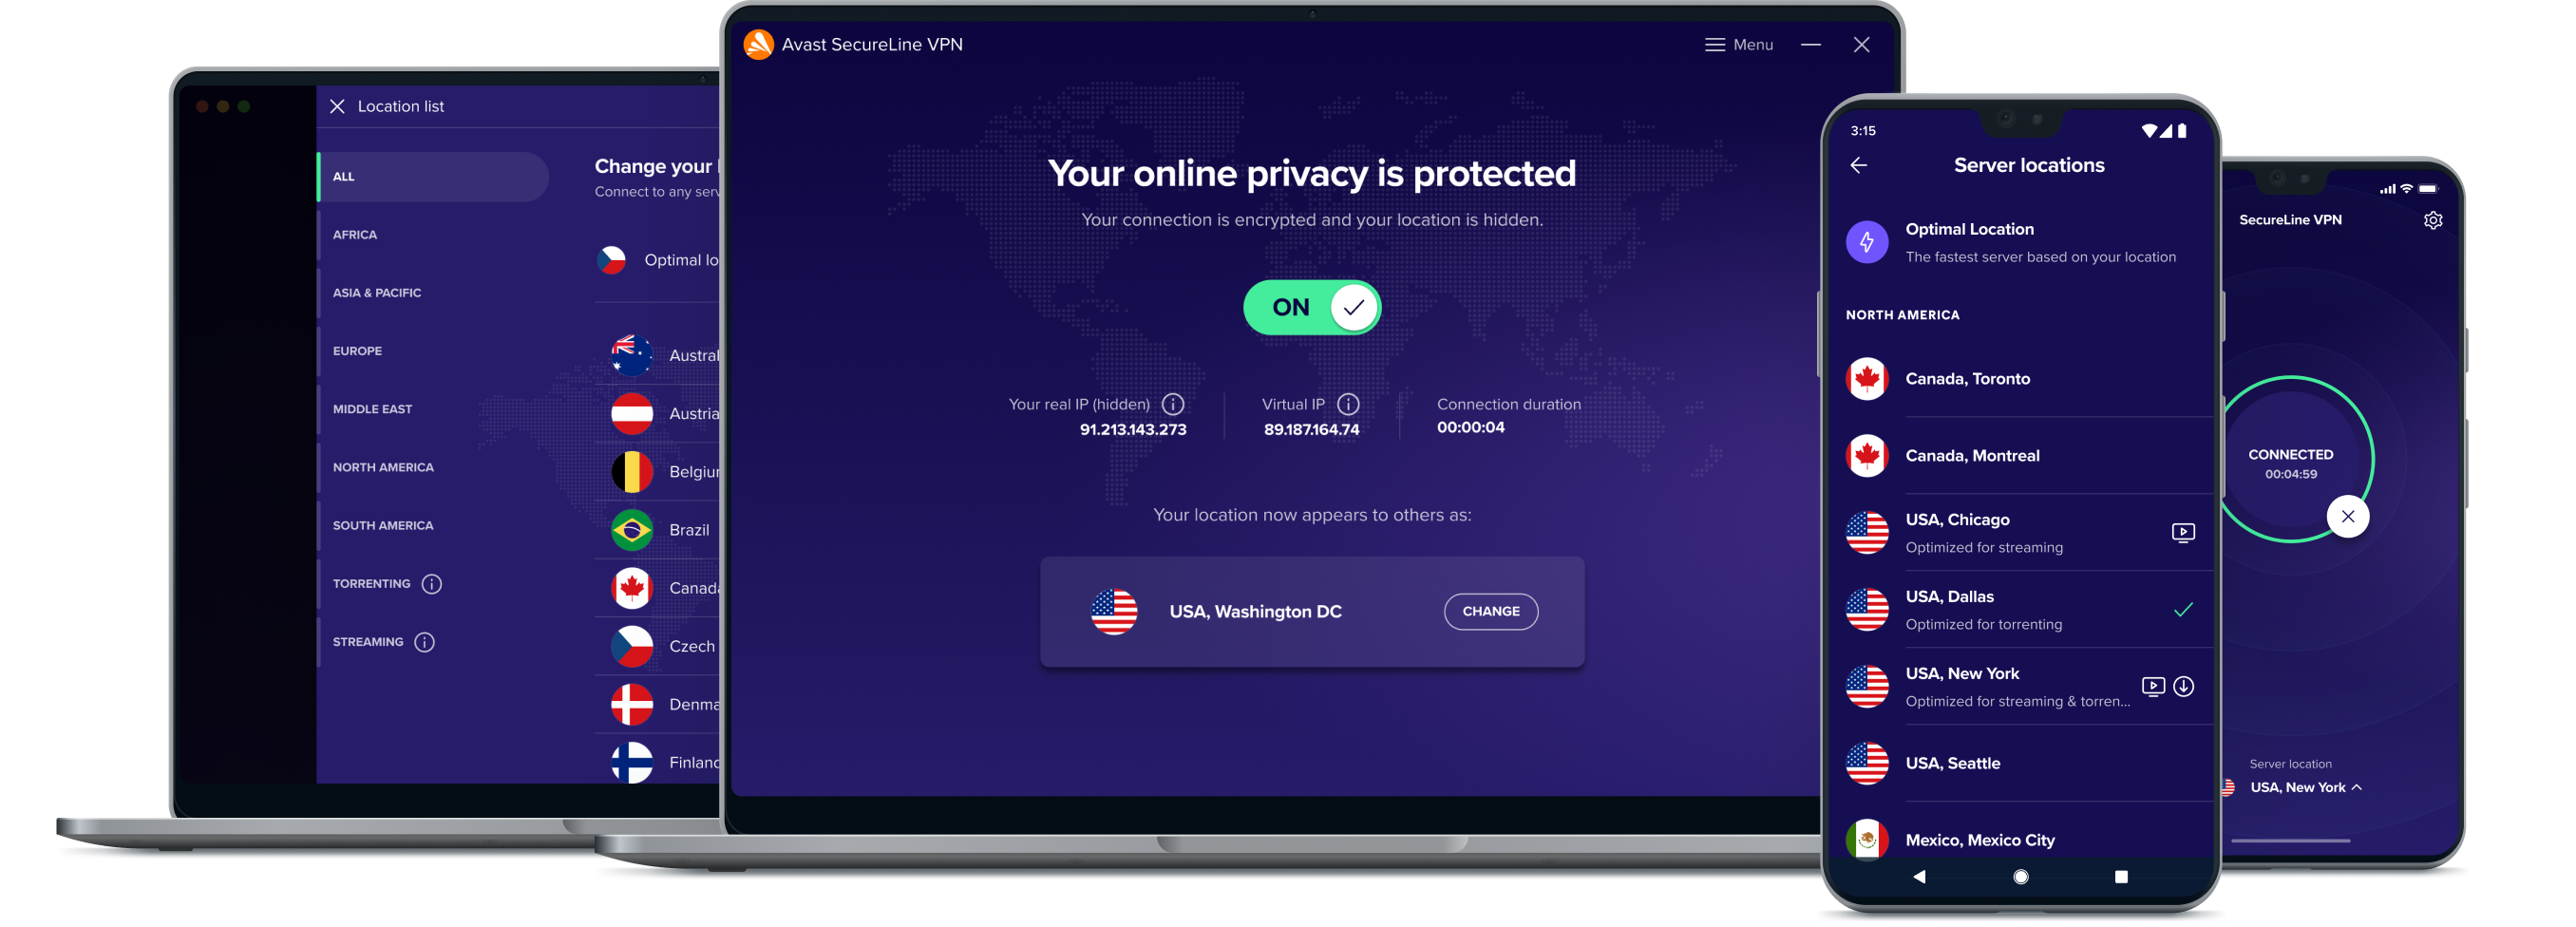 Visit the official Avast website
Download the latest version of Avast Premium Security Setup Online